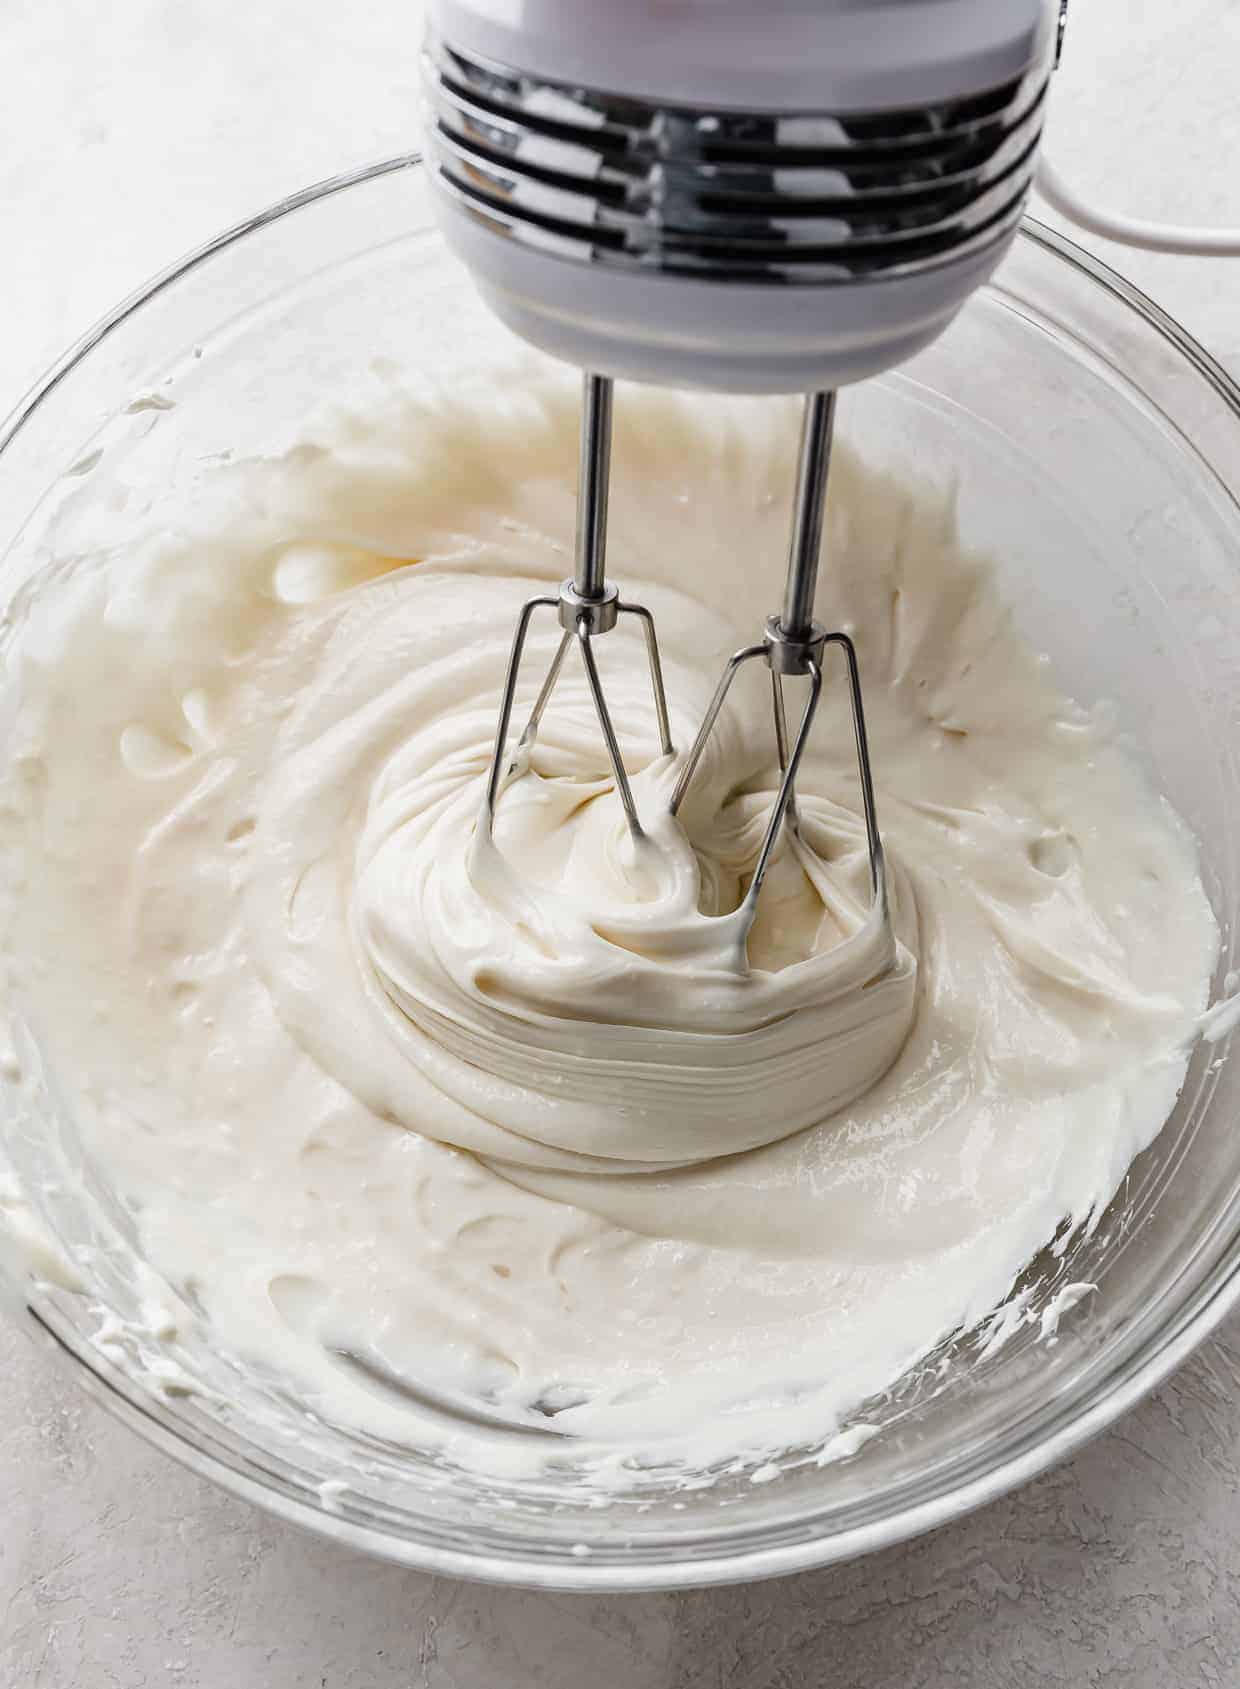 Hand beaters mixing no-bake cheesecake filling in a glass bowl.